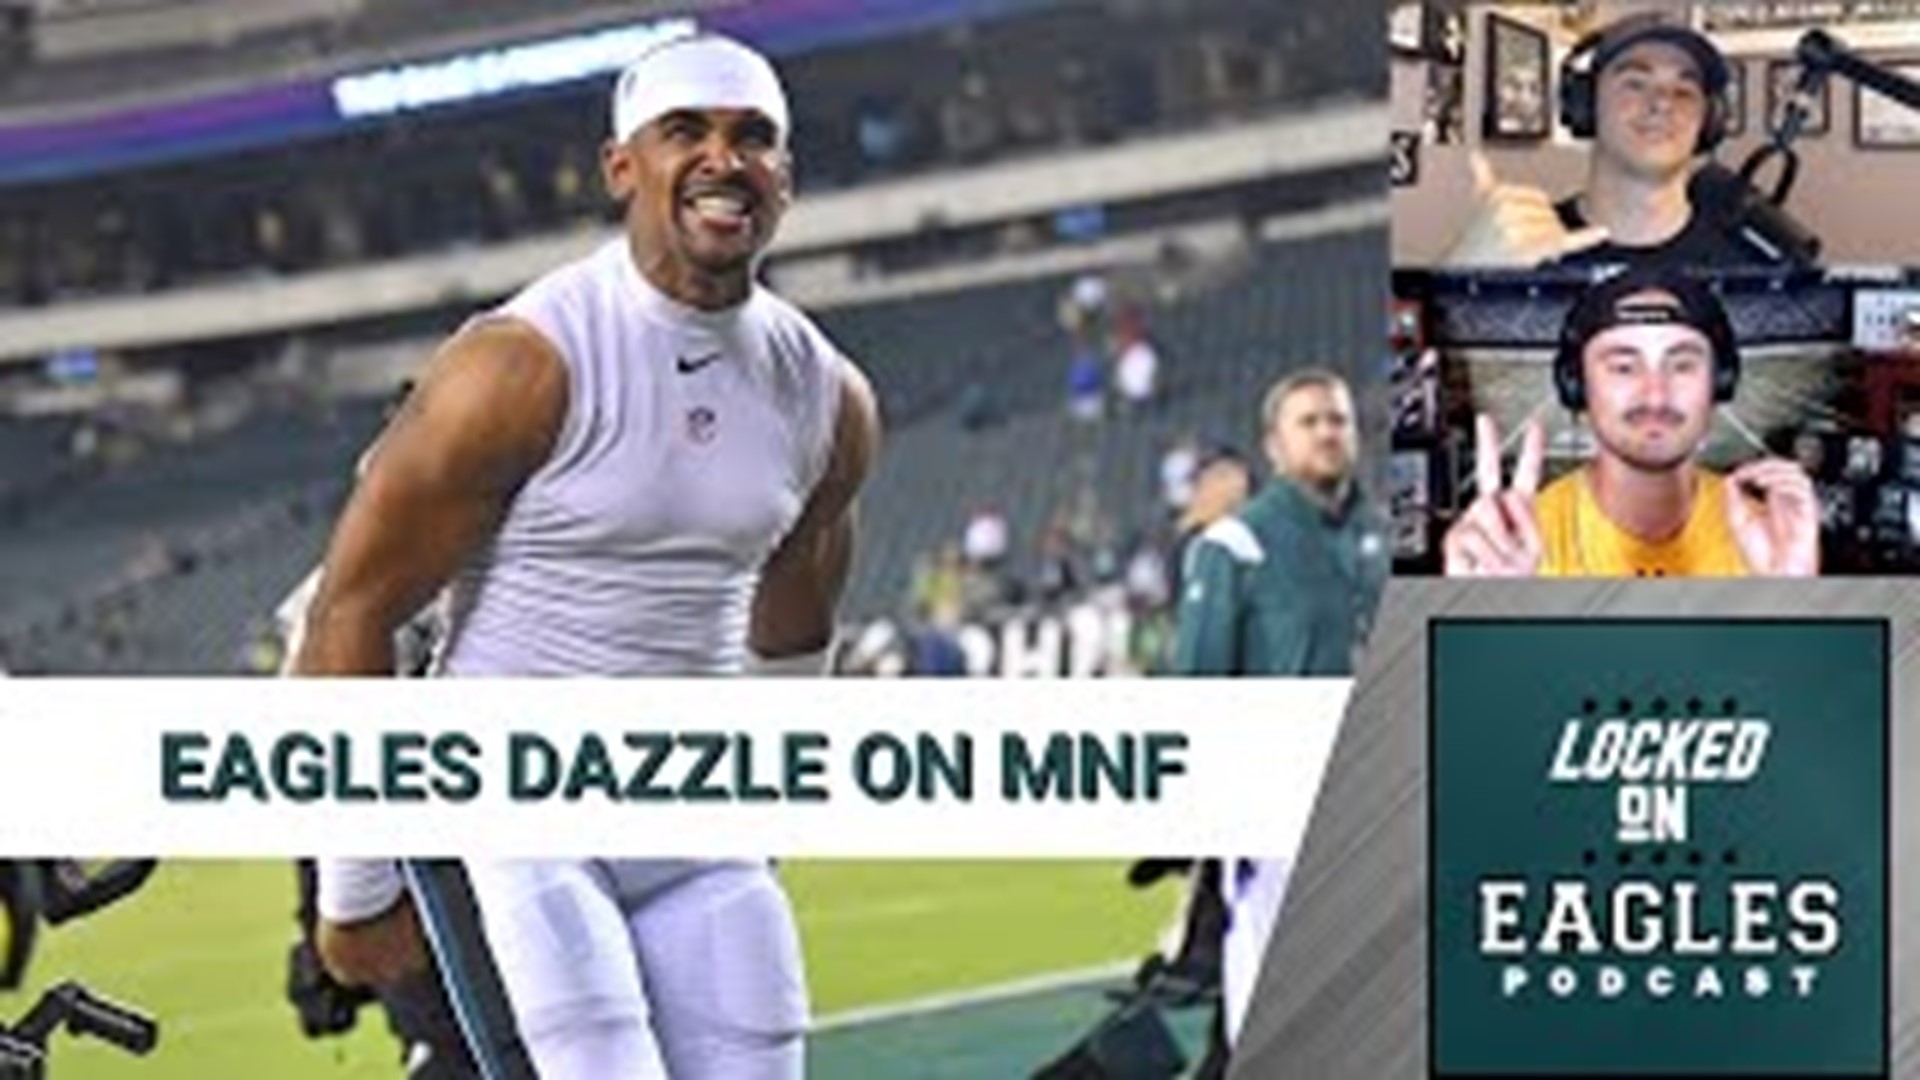 The Philadelphia Eagles move to 2-0 for the first time since 2016 after winning in dominating fashion against the Minnesota Vikings on Monday Night Football.